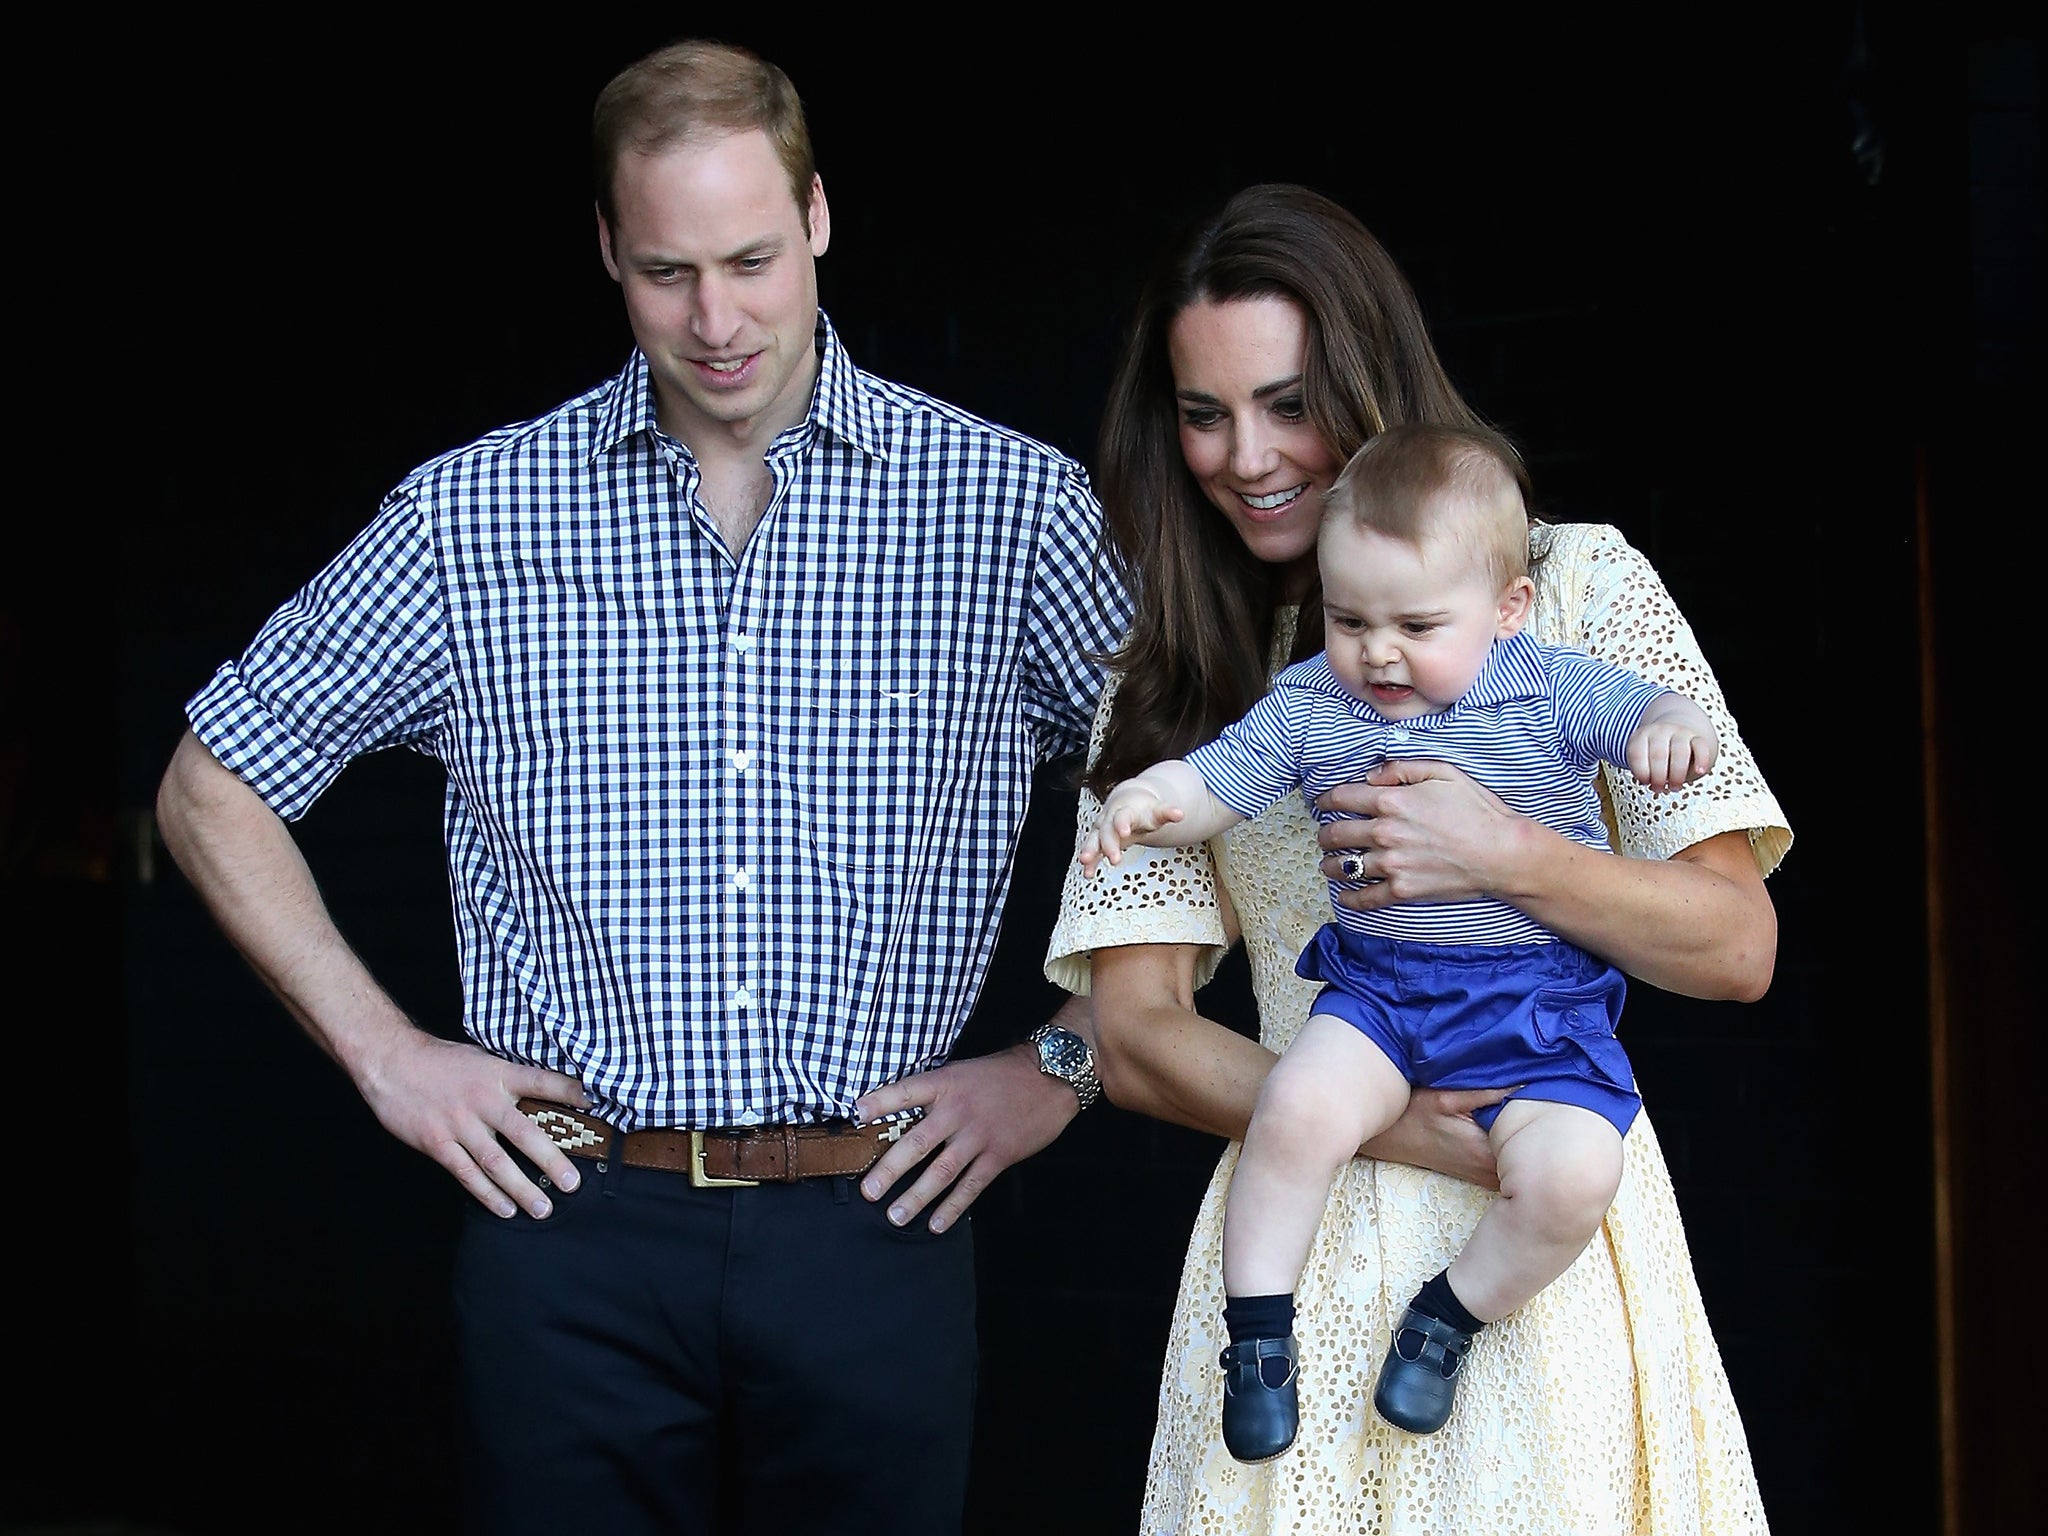 Catherine, Duchess of Cambridge holds Prince George of Cambridge as Prince William, Duke of Cambridge looks on whilst meeting a Bilby called George at Taronga Zoo in Sydney